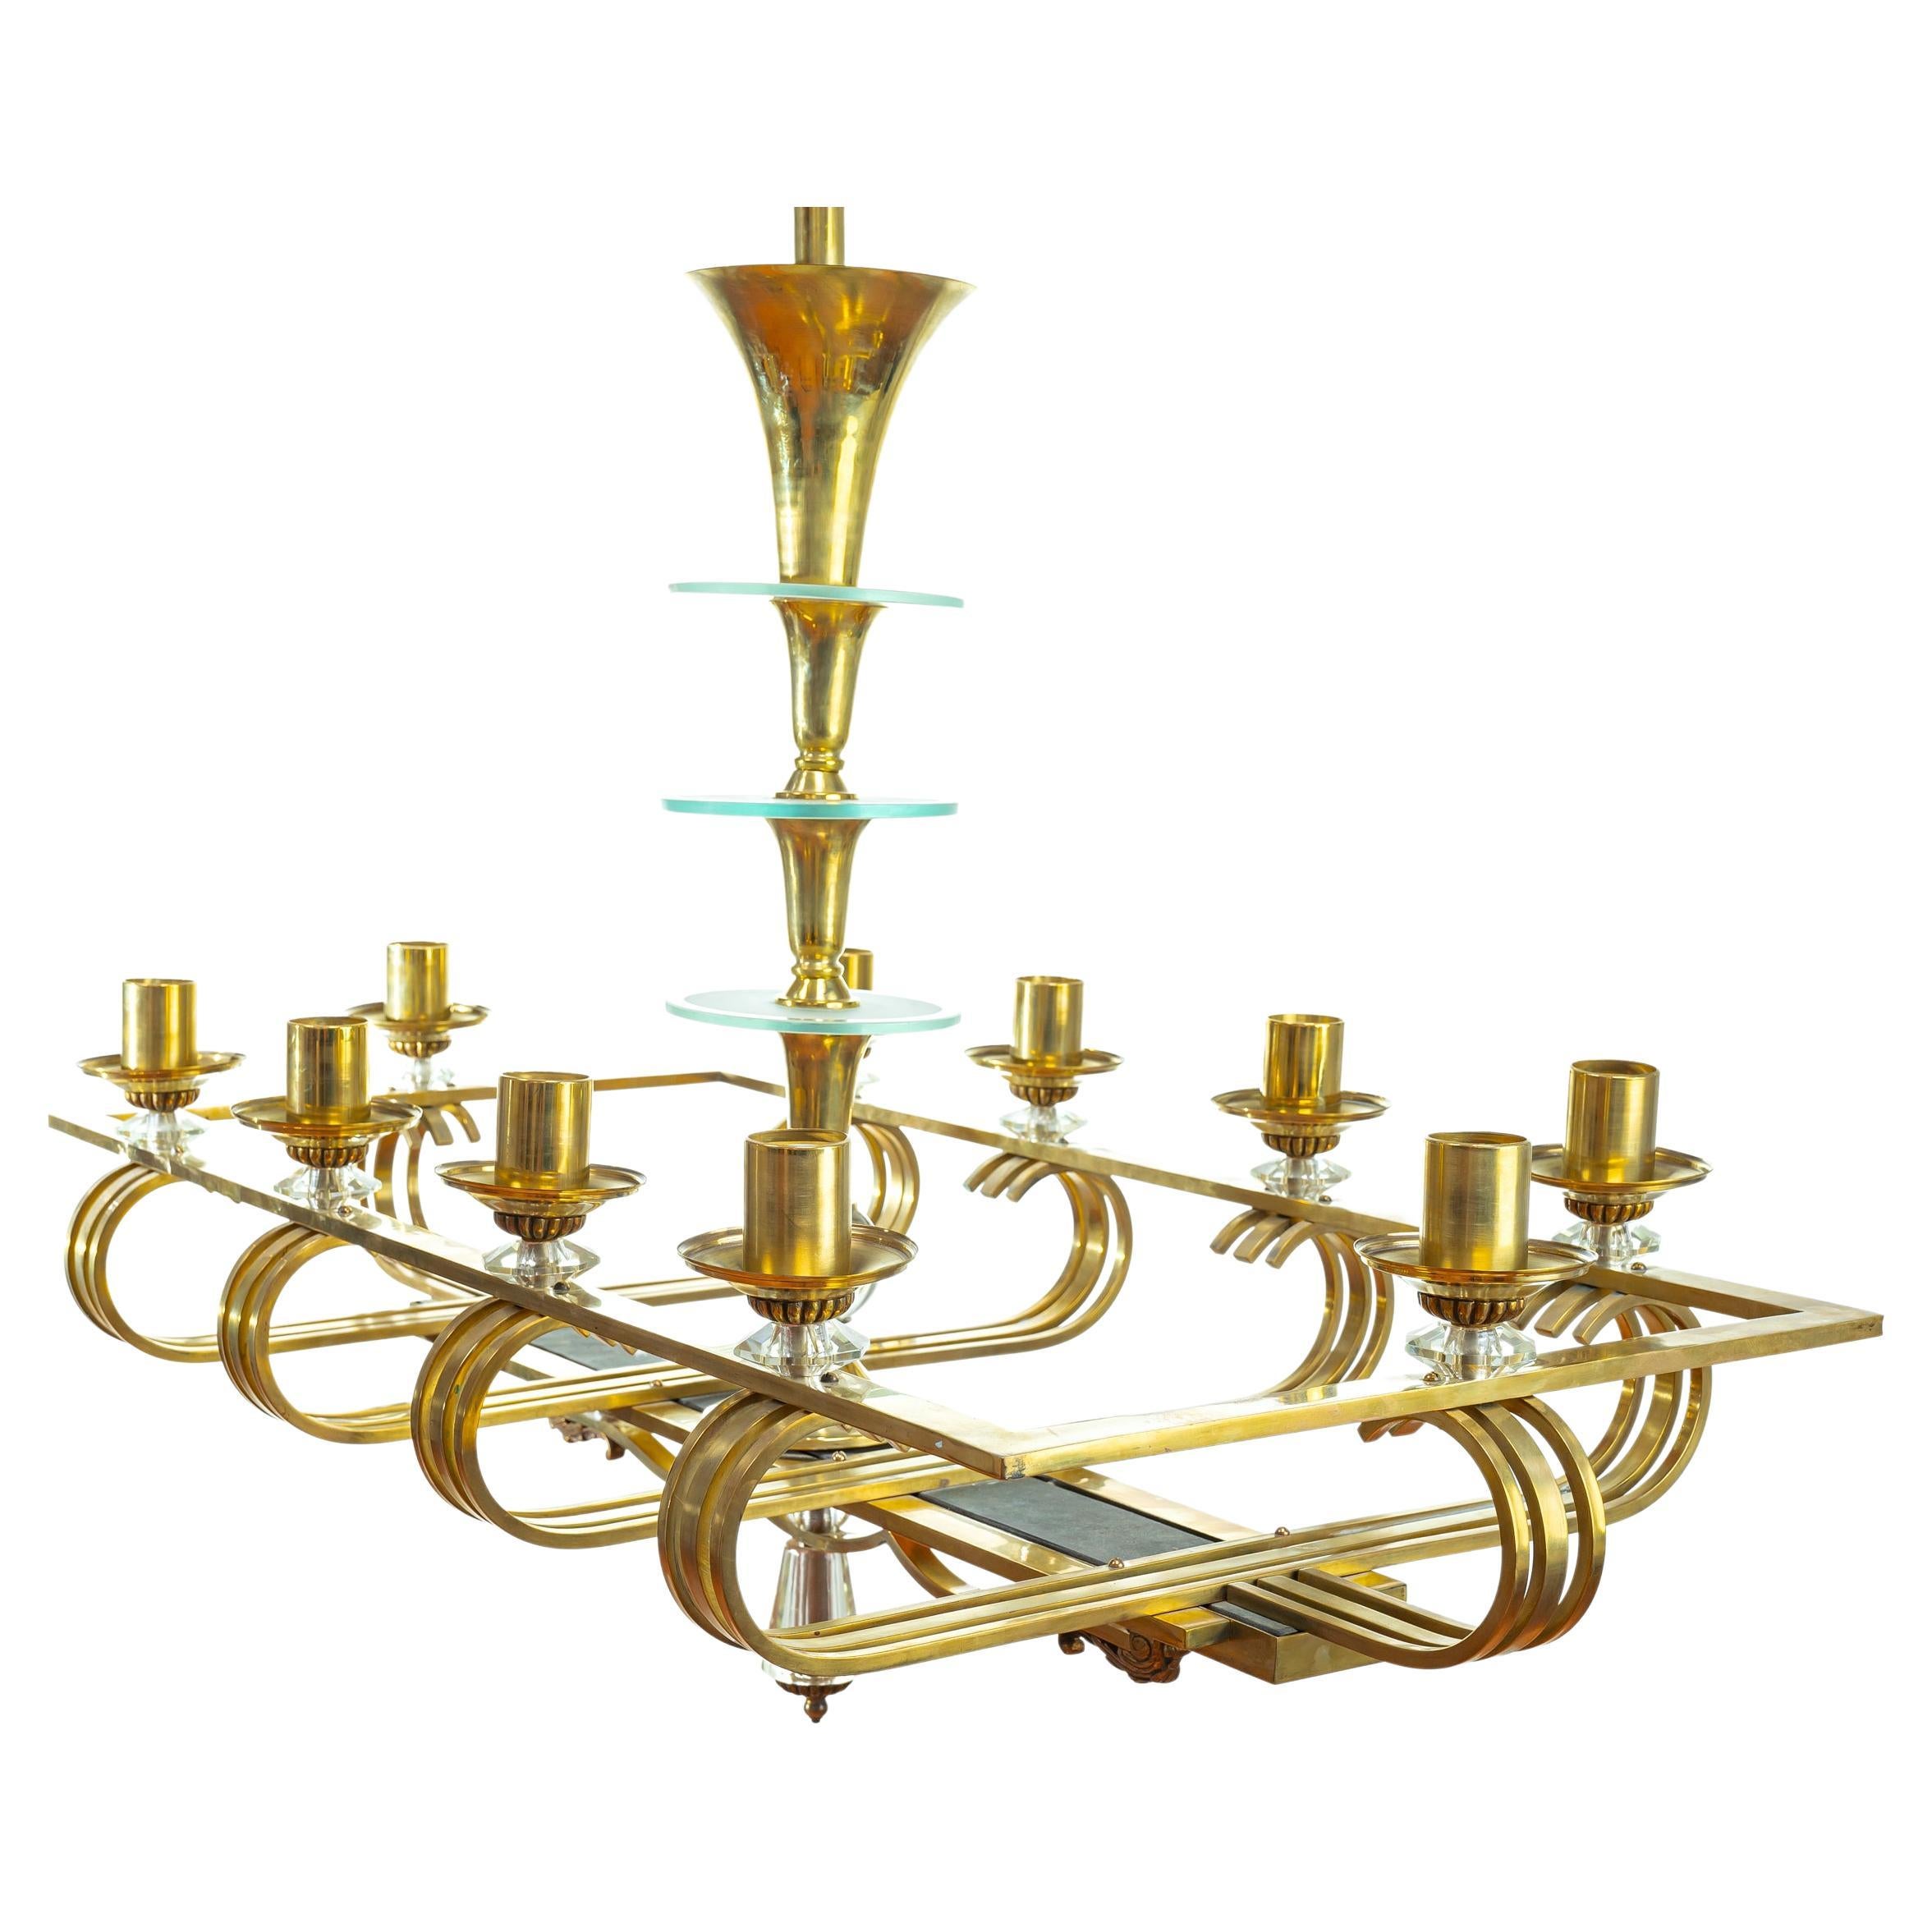 Spectacular Mid-20th century scandinavian pendant six-light chandelier. Rare model with brass frame and glass details. Paavo tynell style.

The light is in good condition, and the wires have been renewed. There is some wear consistent with age and